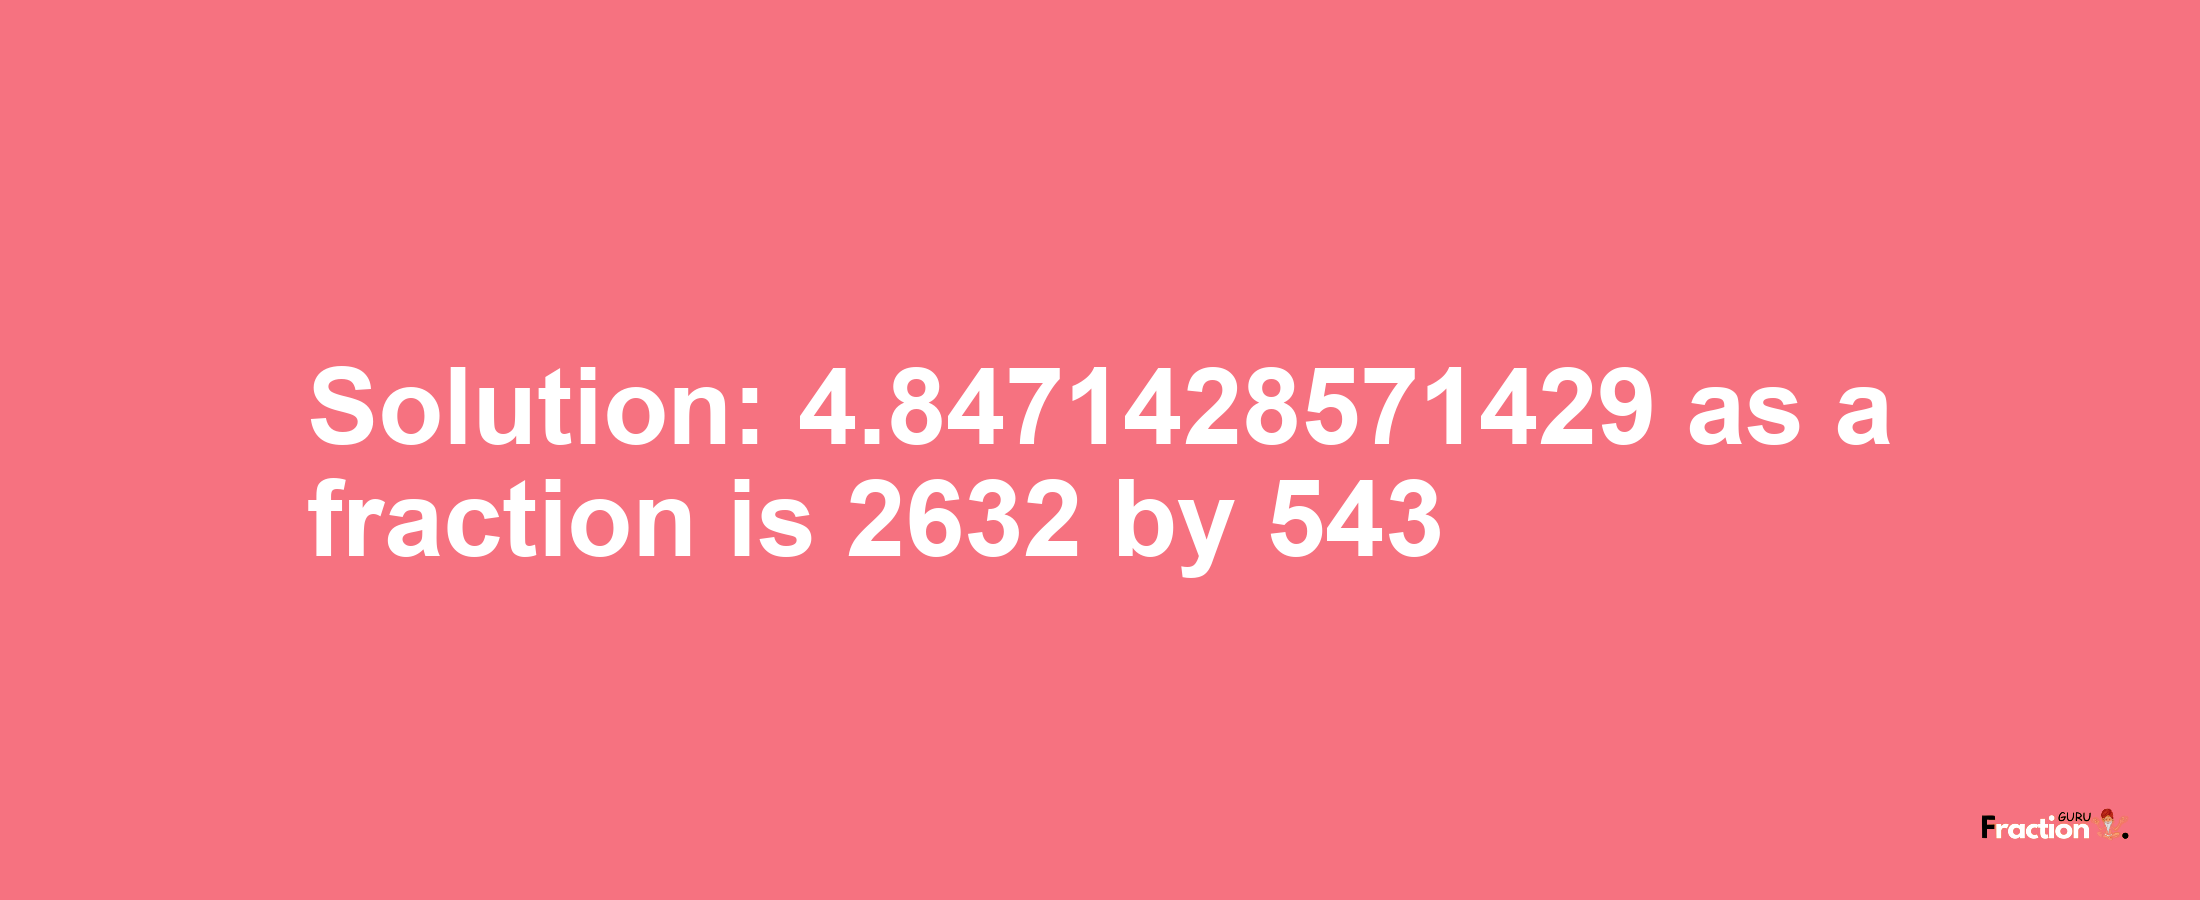 Solution:4.8471428571429 as a fraction is 2632/543